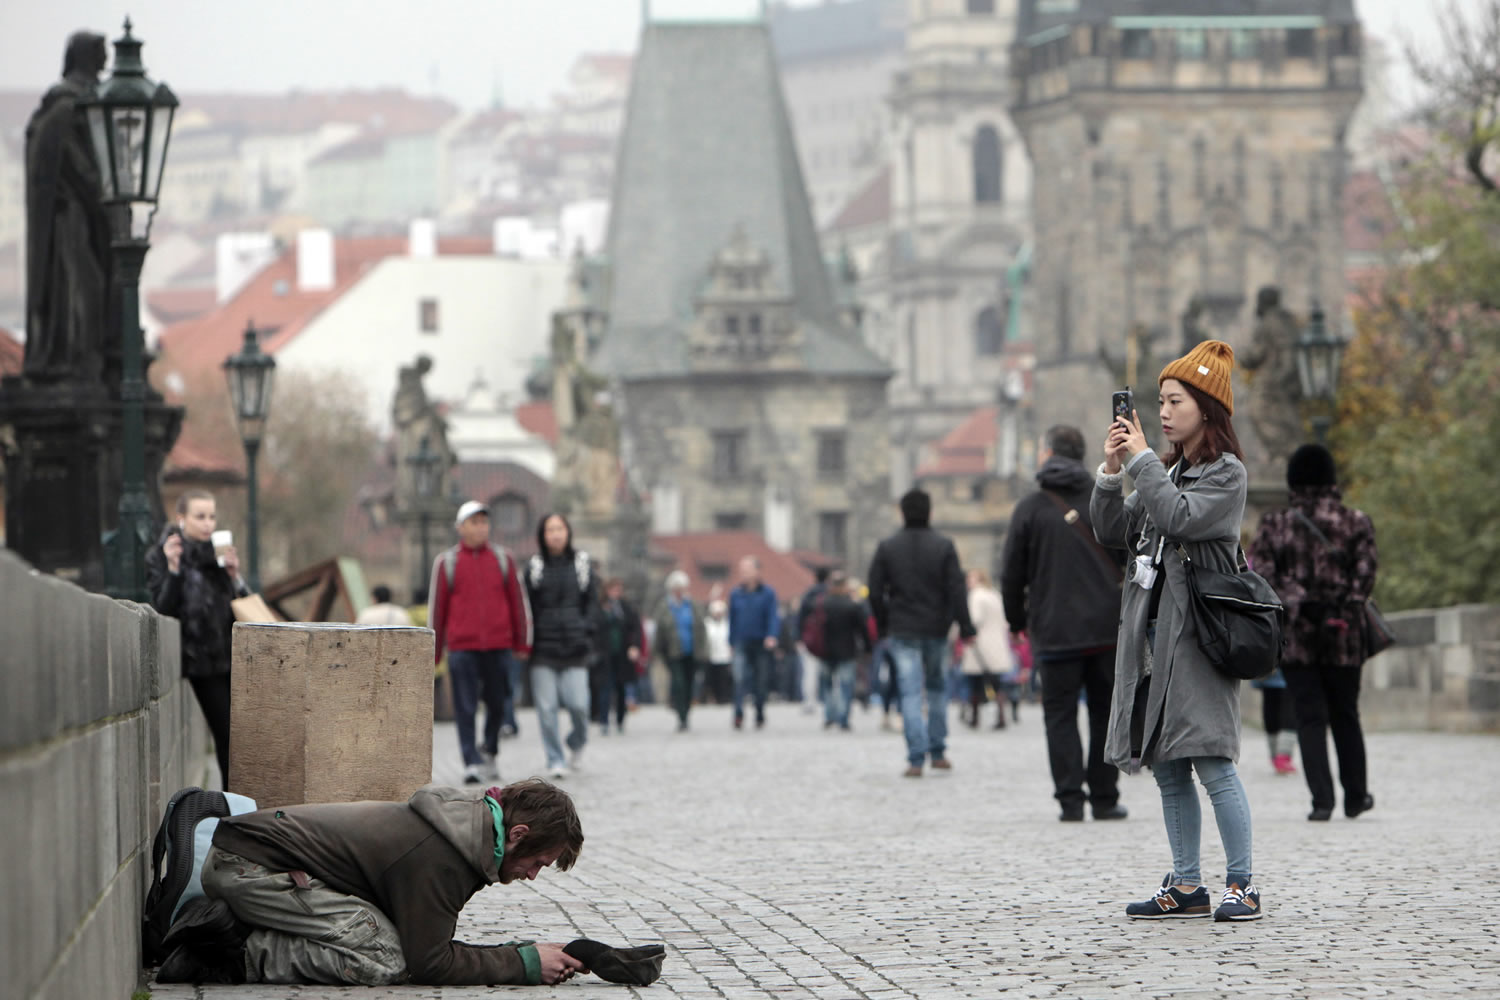 Beggars will give Prague WiFi